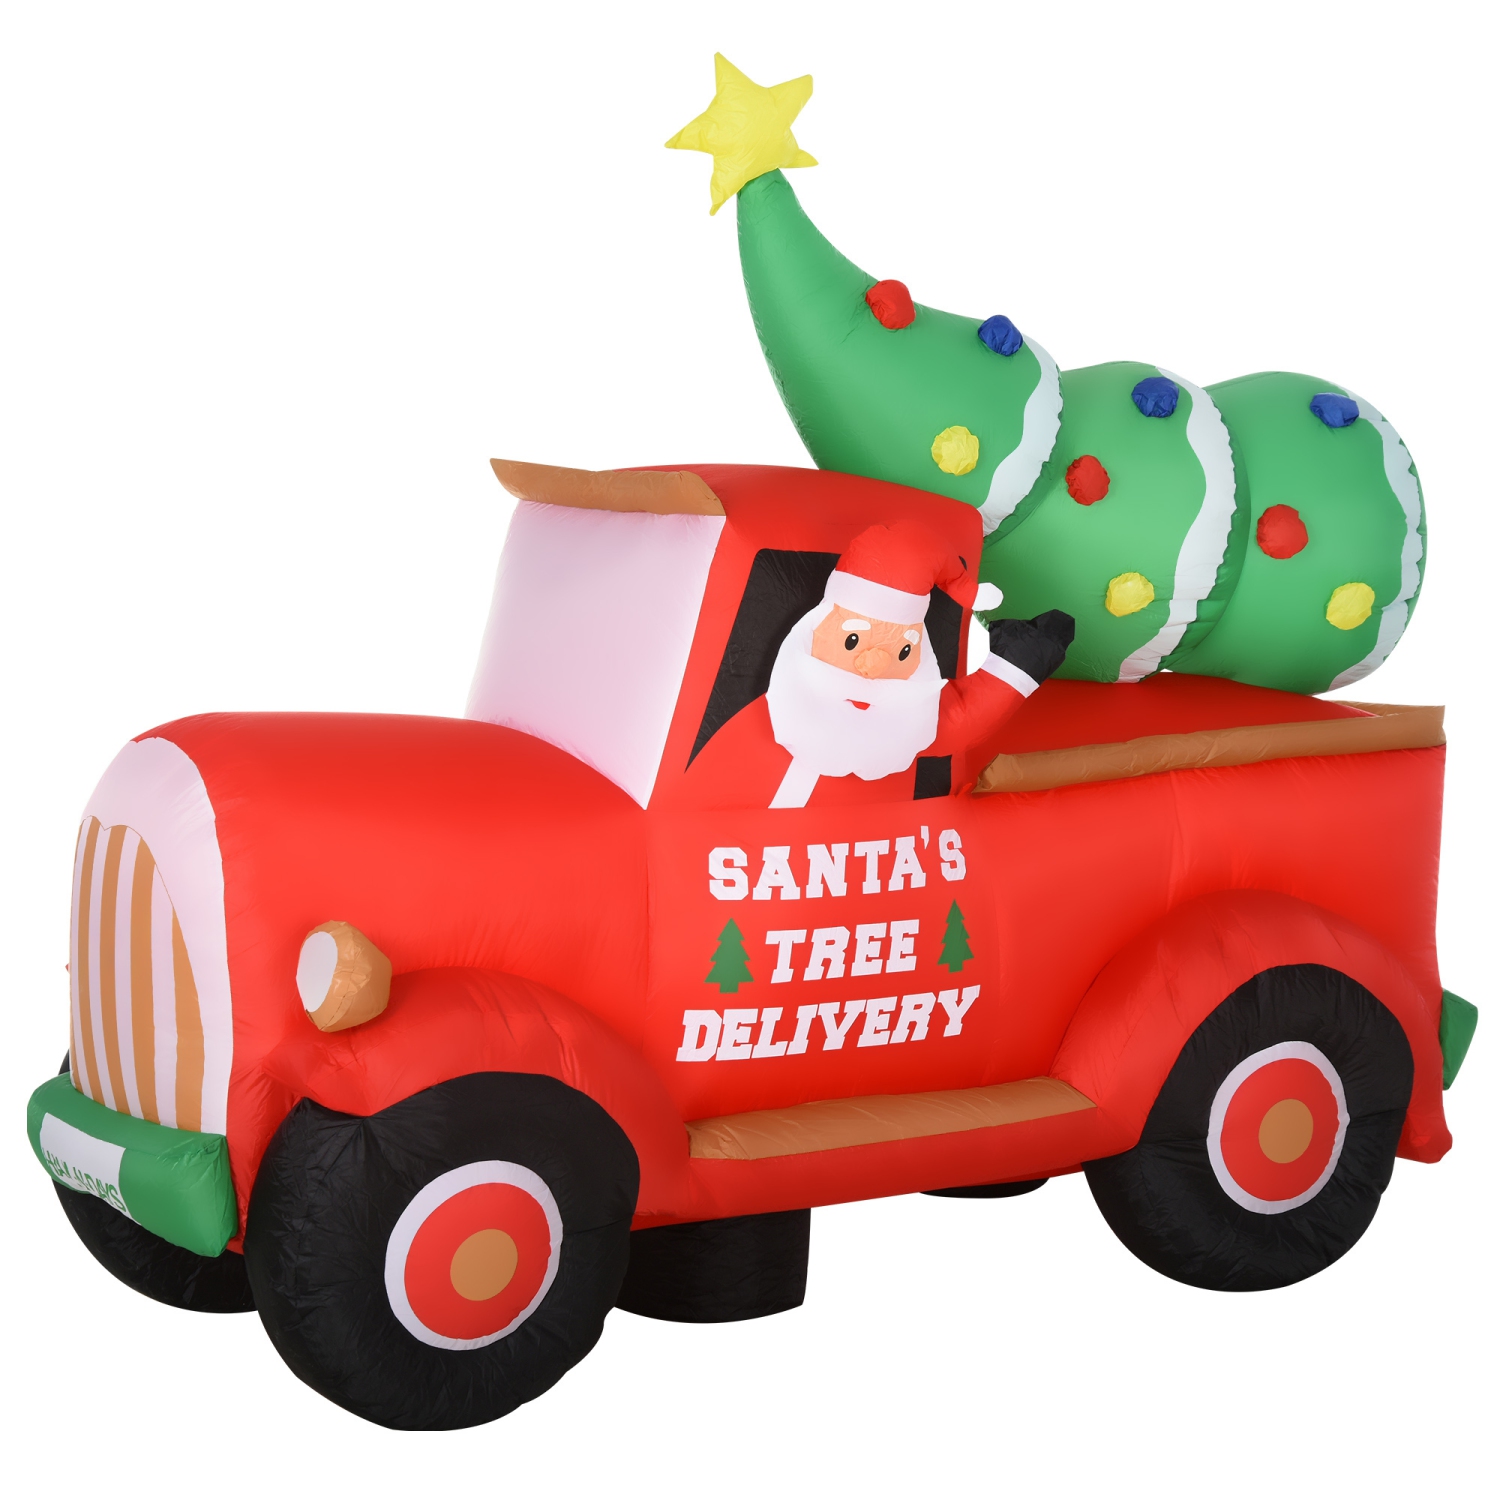 HOMCOM 6ft Christmas Inflatables Santa on Red Truck with Tree Air-blow Holiday Yard Decoration for Indoors & Outdoors with LED Lights